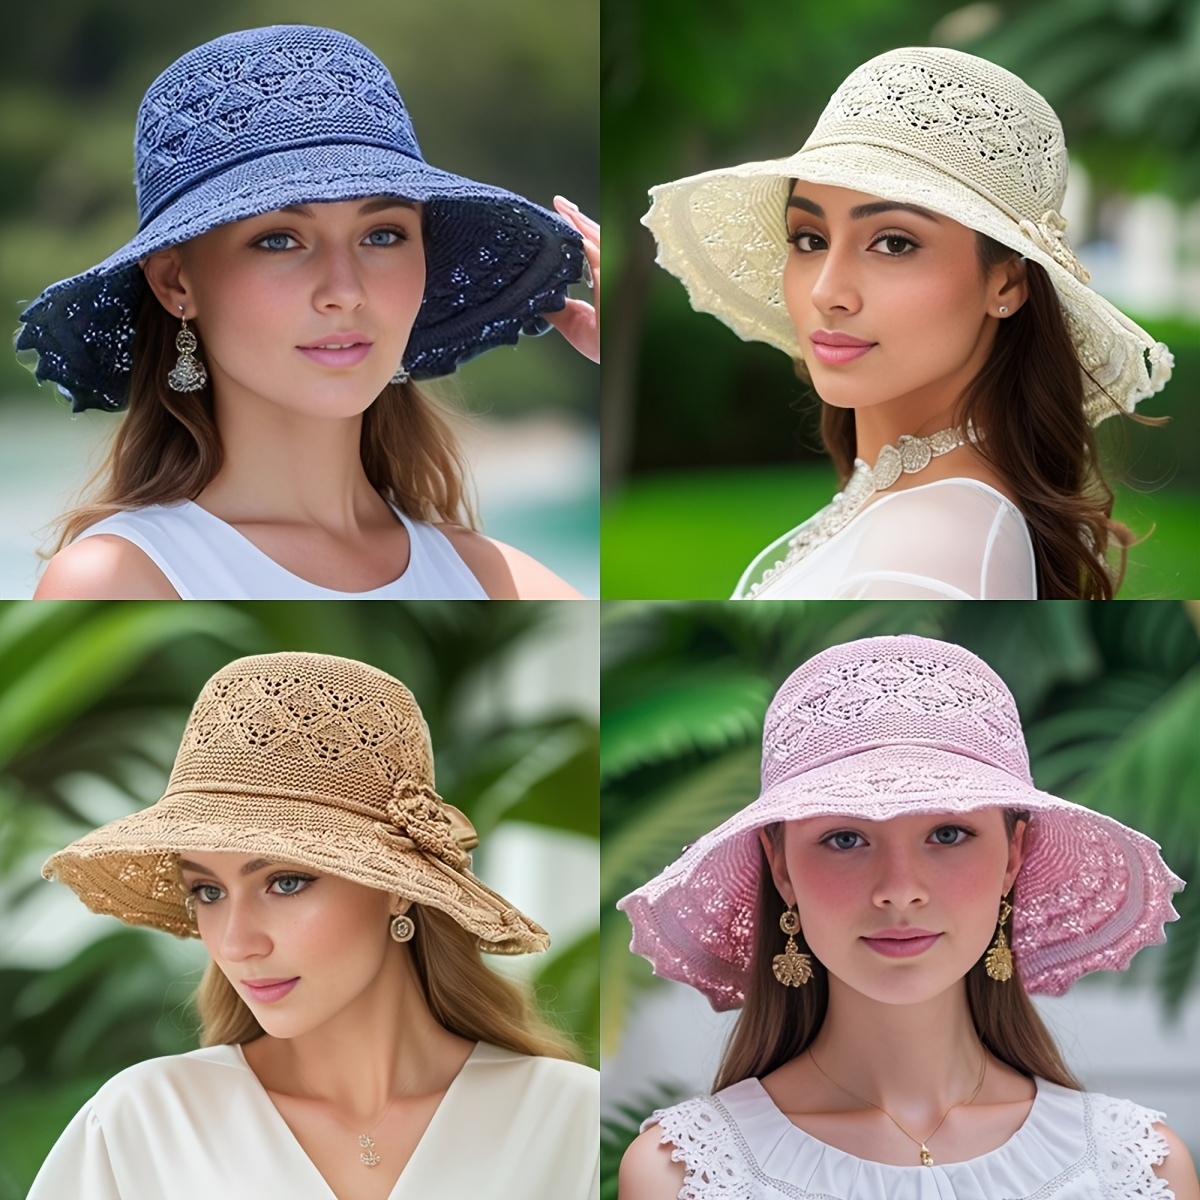 

2 Piece Women's Crochet Lace Sun Hat Set, Adjustable Wide Brim Beach Caps With Bow Detail, Foldable Summer Accessory For Outdoor Use